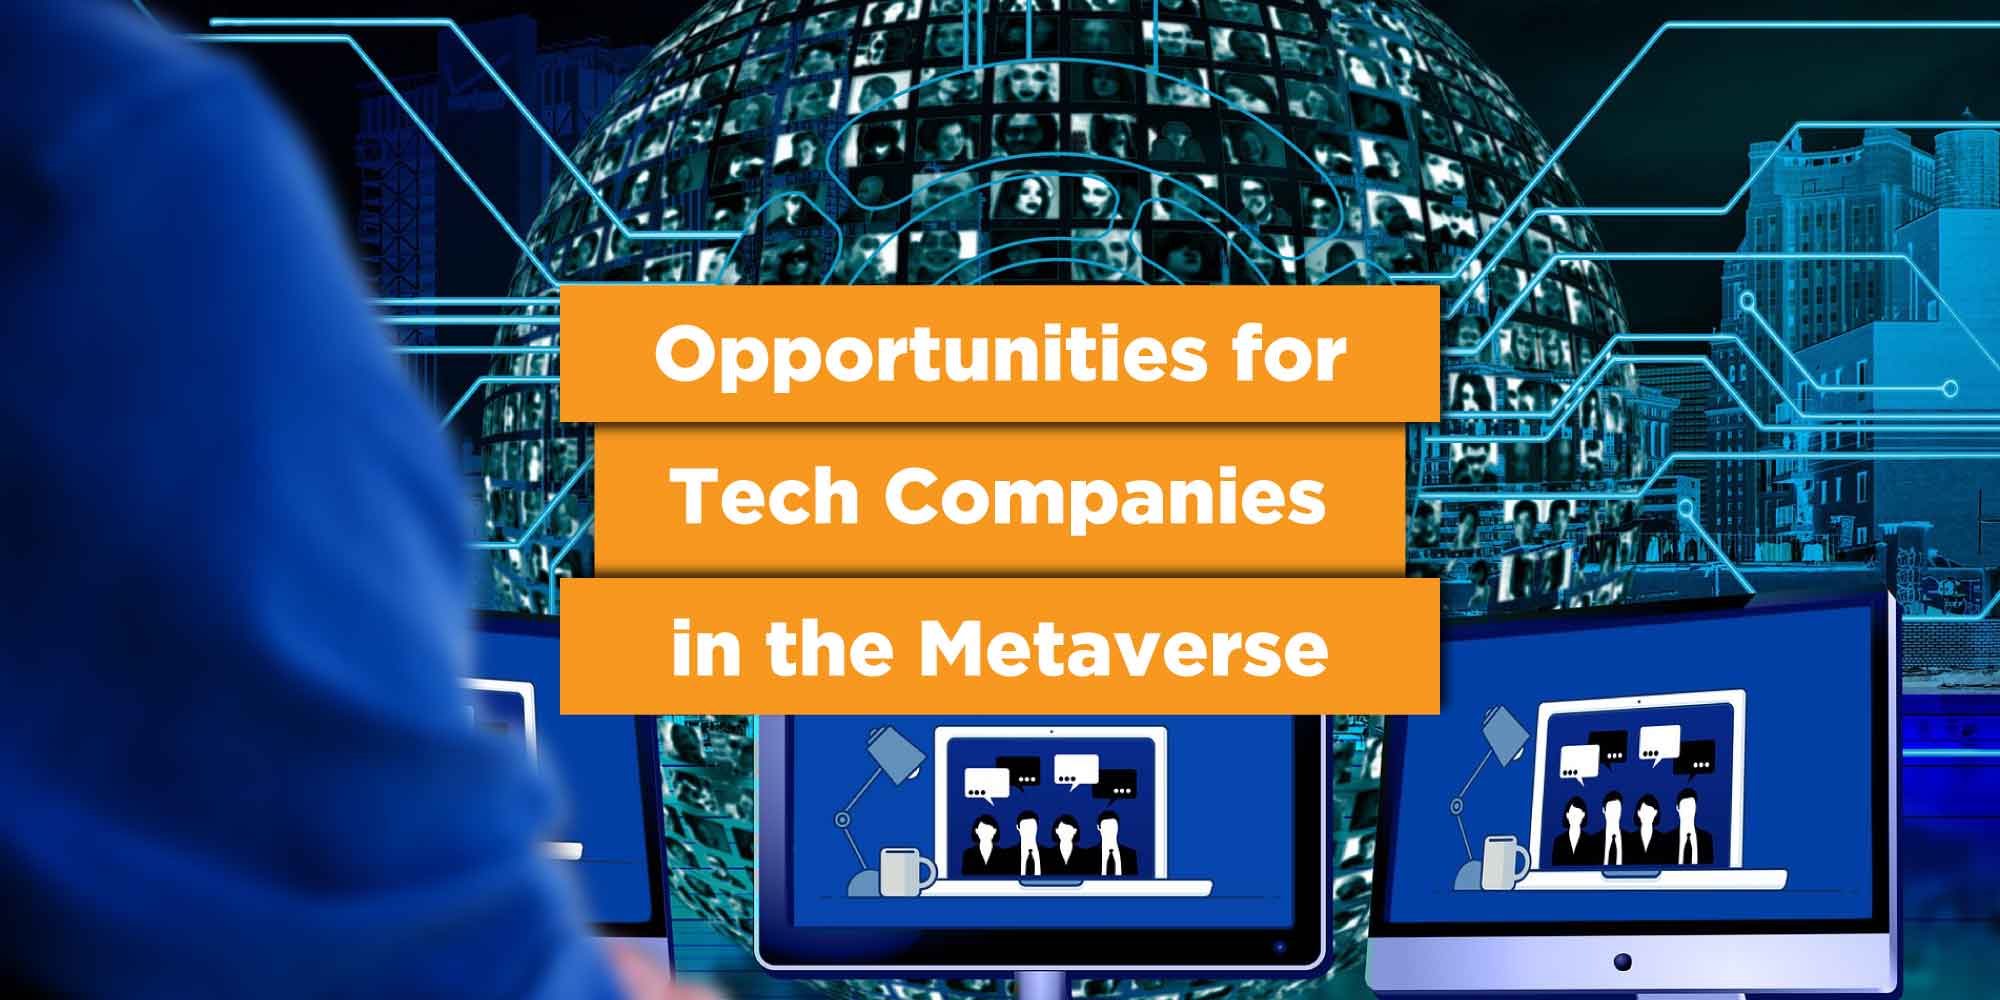 Tech Companies in the Metaverse